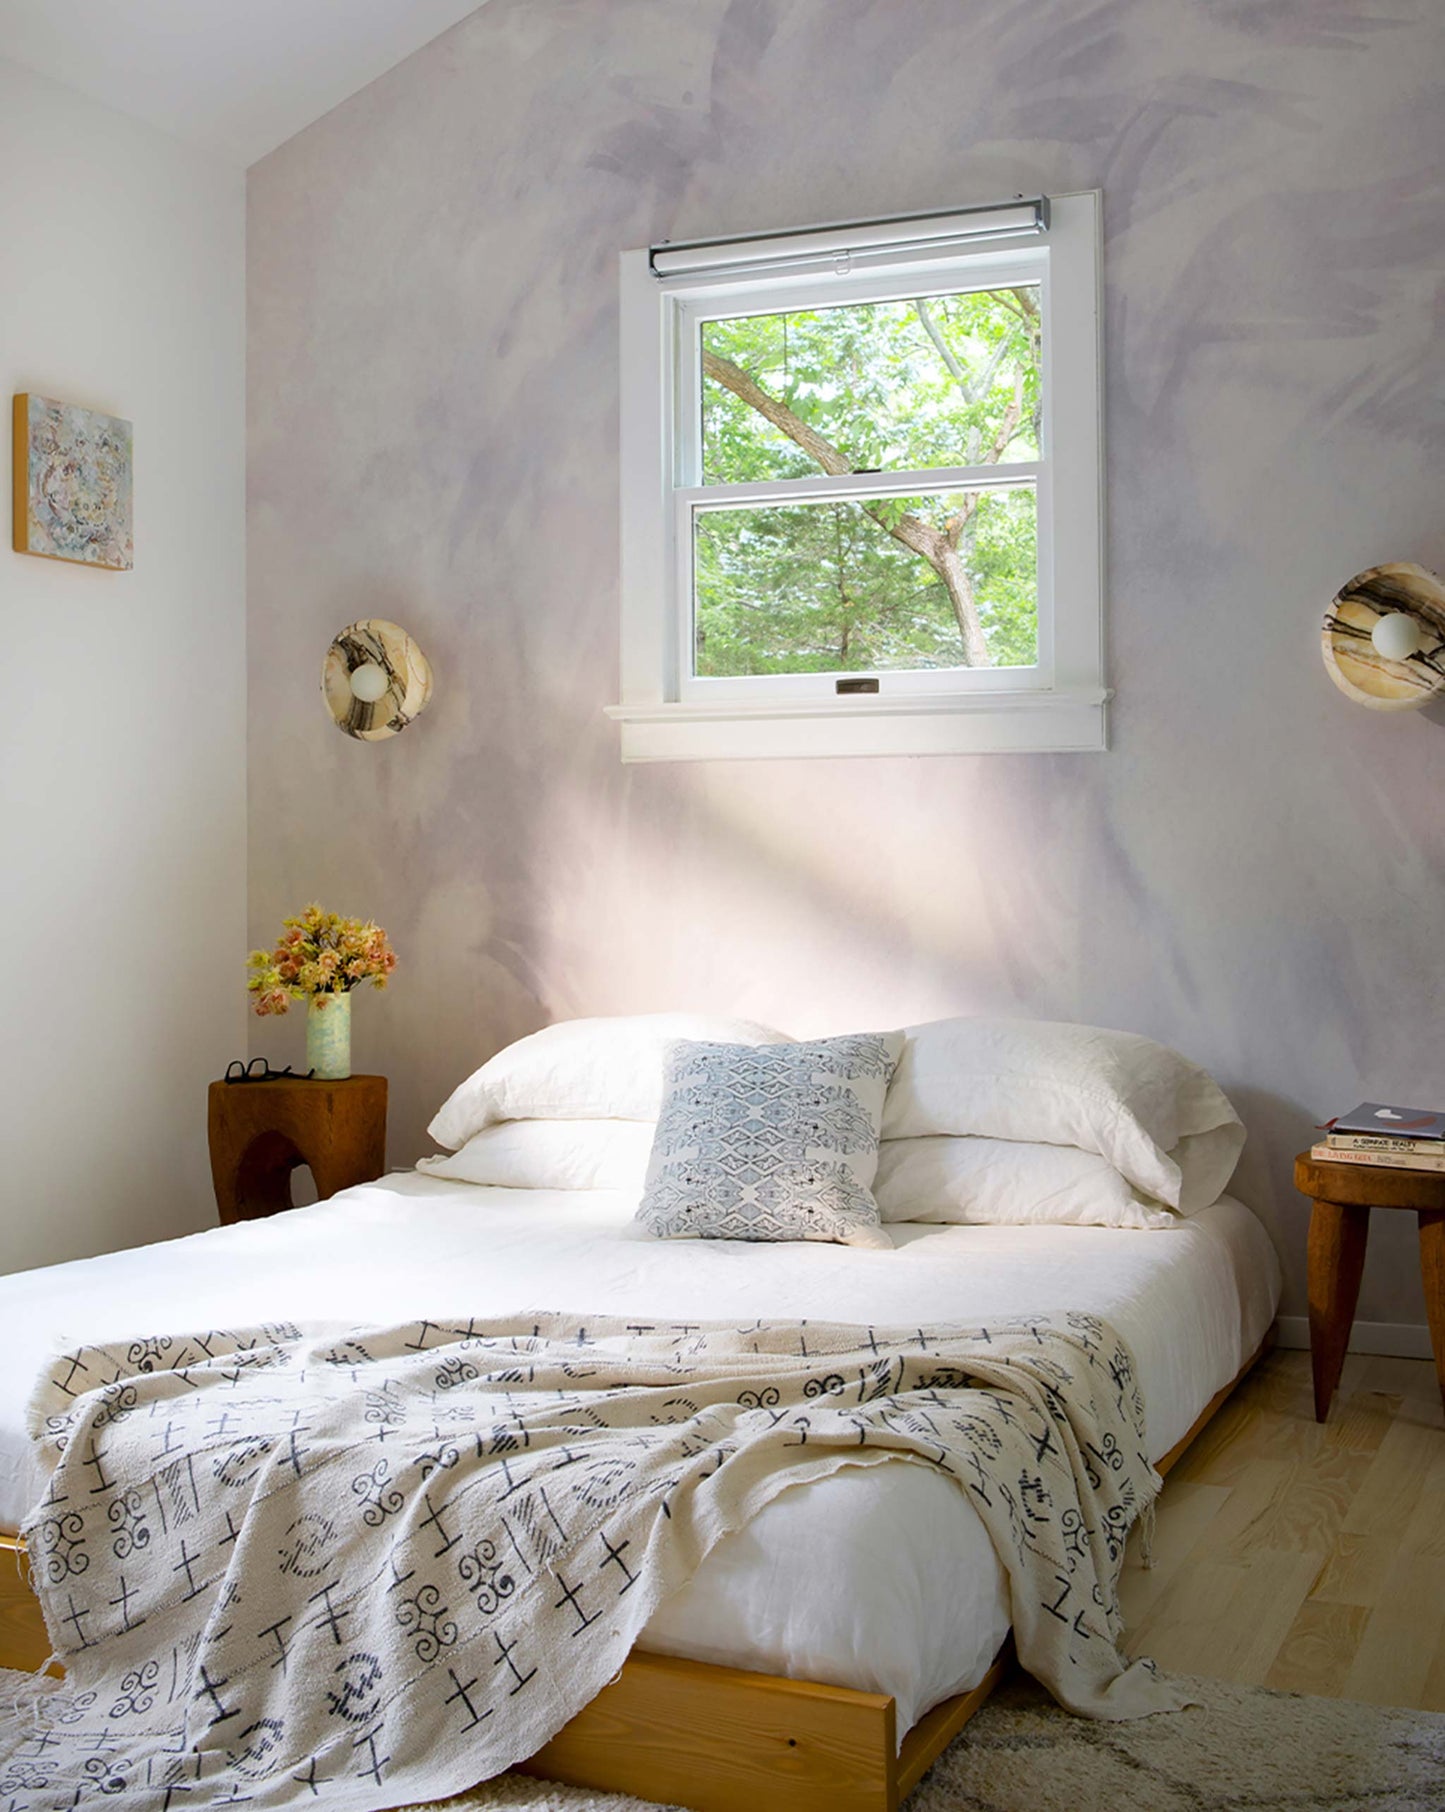 A bedroom with Eskayel's Reflettere Wallpaper Mural in the colorway Alba installed as an accent wall.